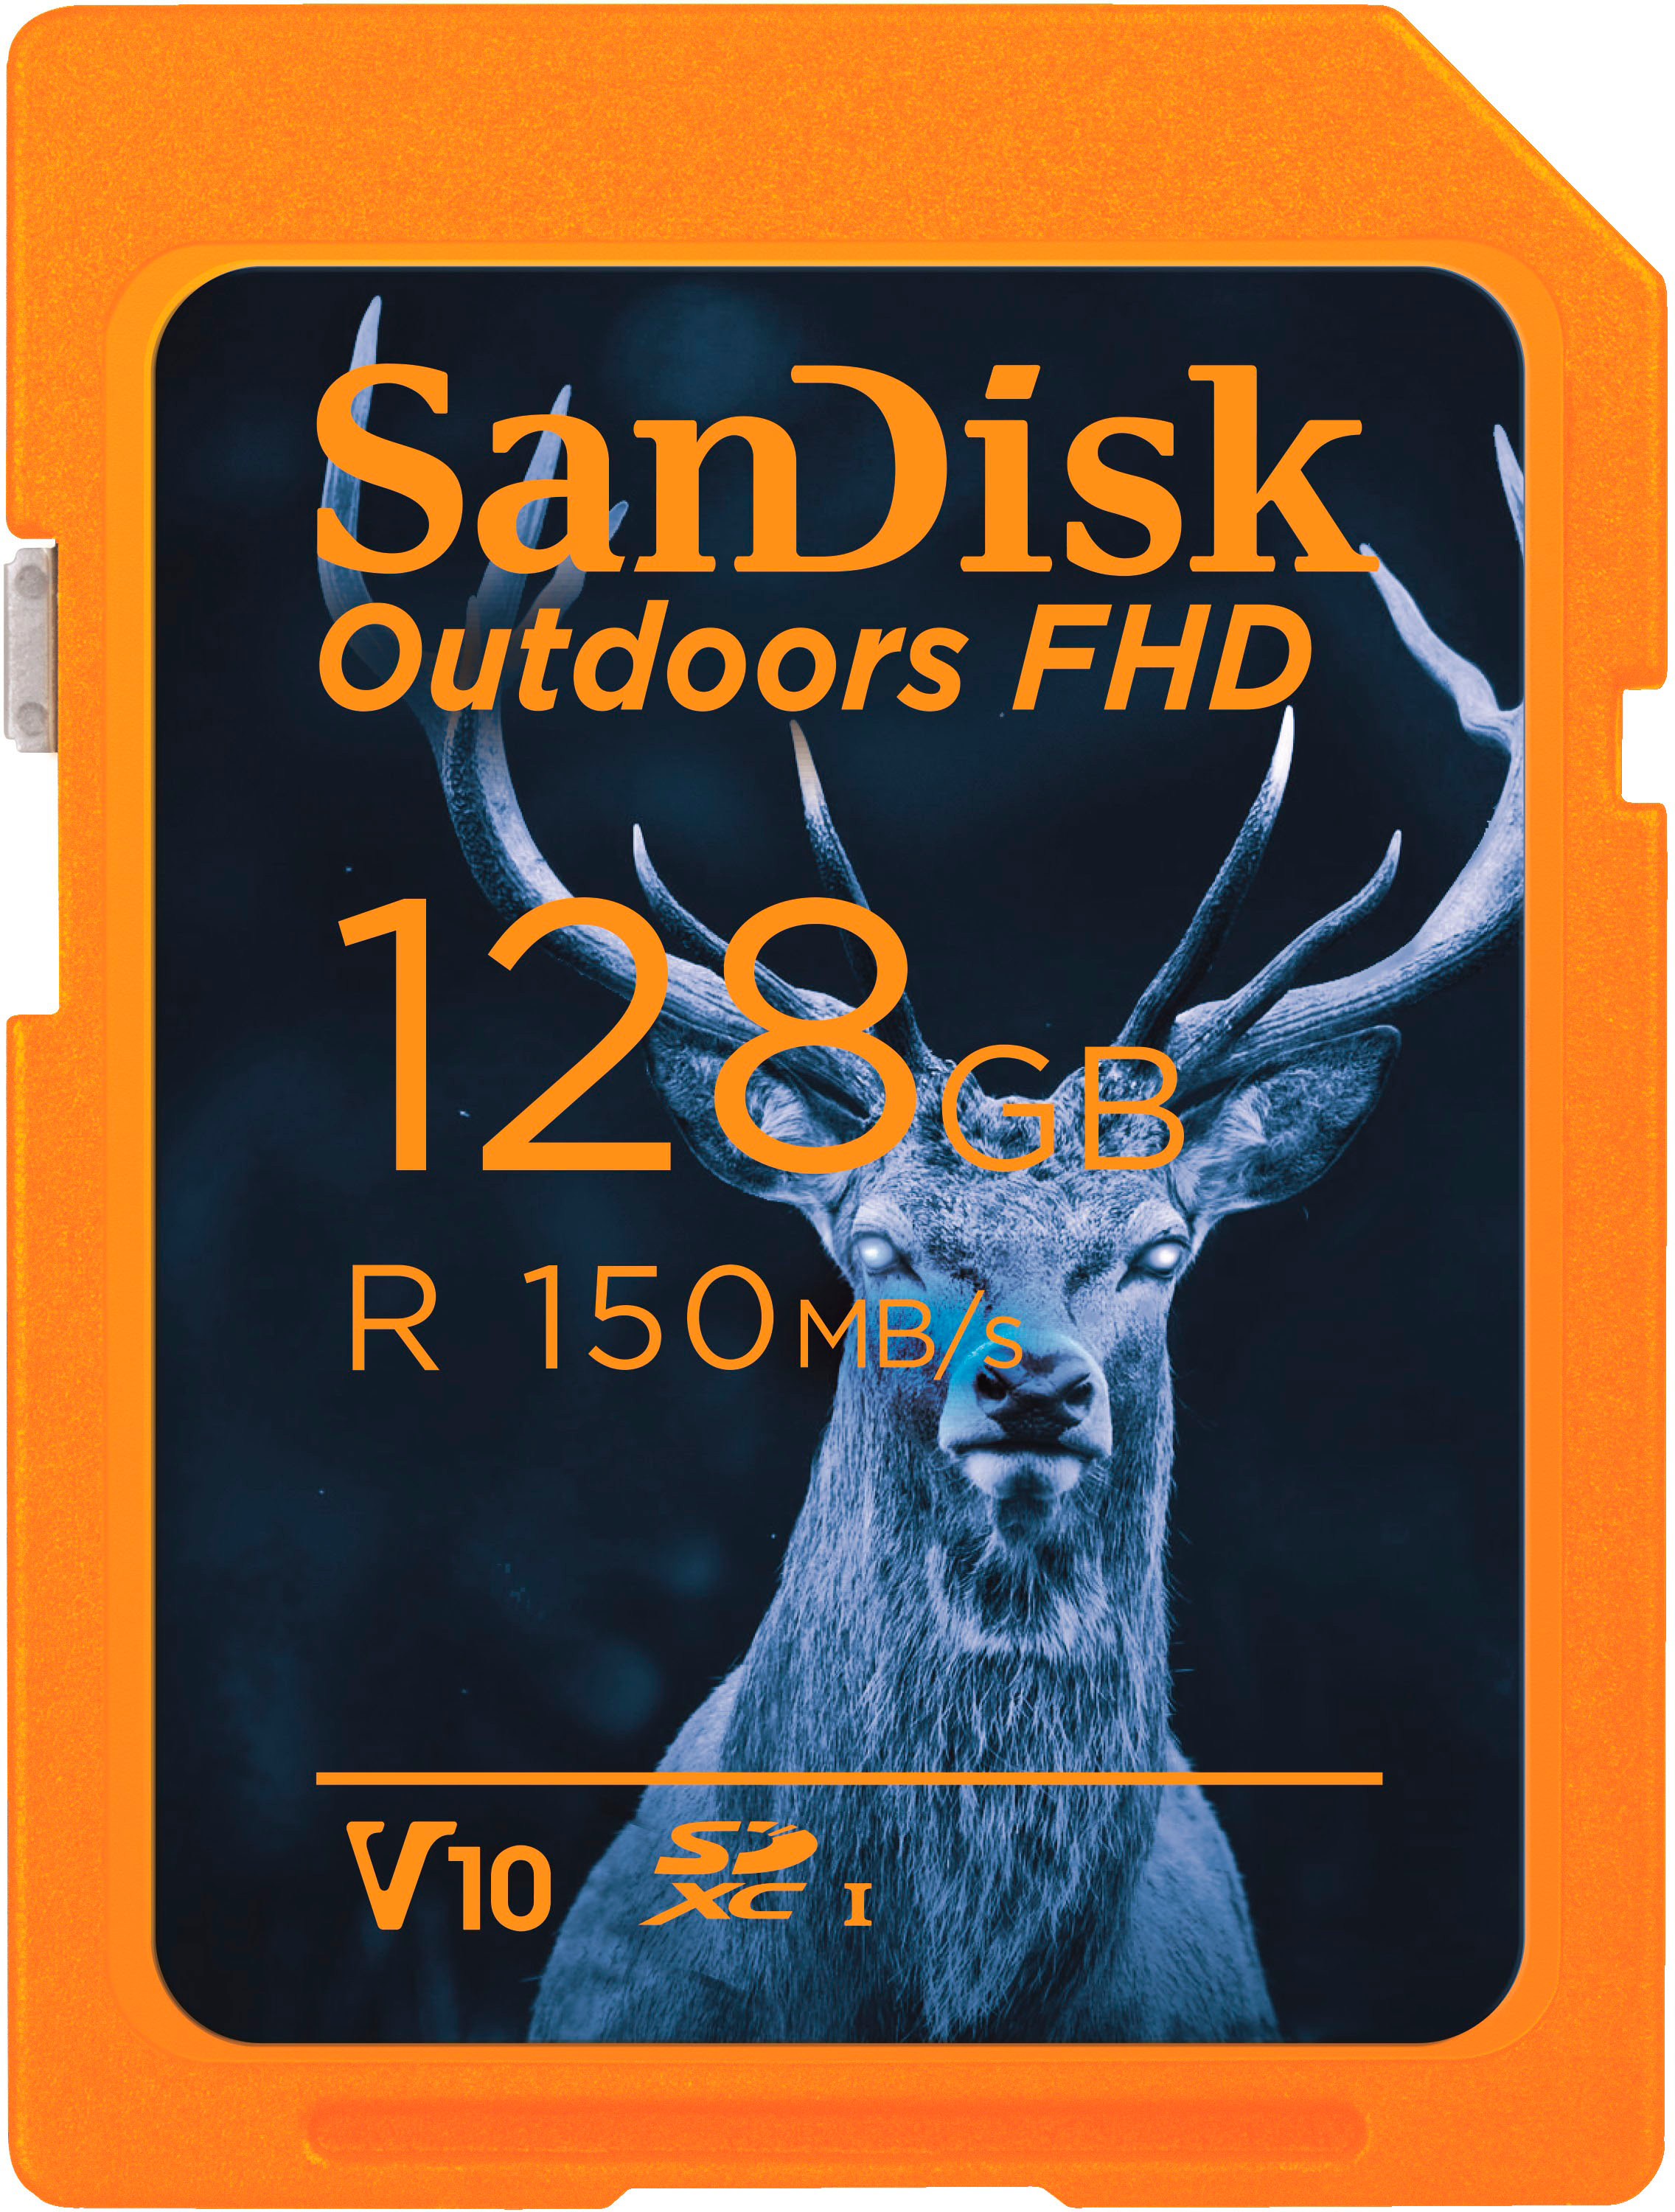 SanDisk Extreme PRO 32GB SDHC/SDXC Class 3 UHS-II Memory Card  SDSDXPB-032G-A46 - Best Buy